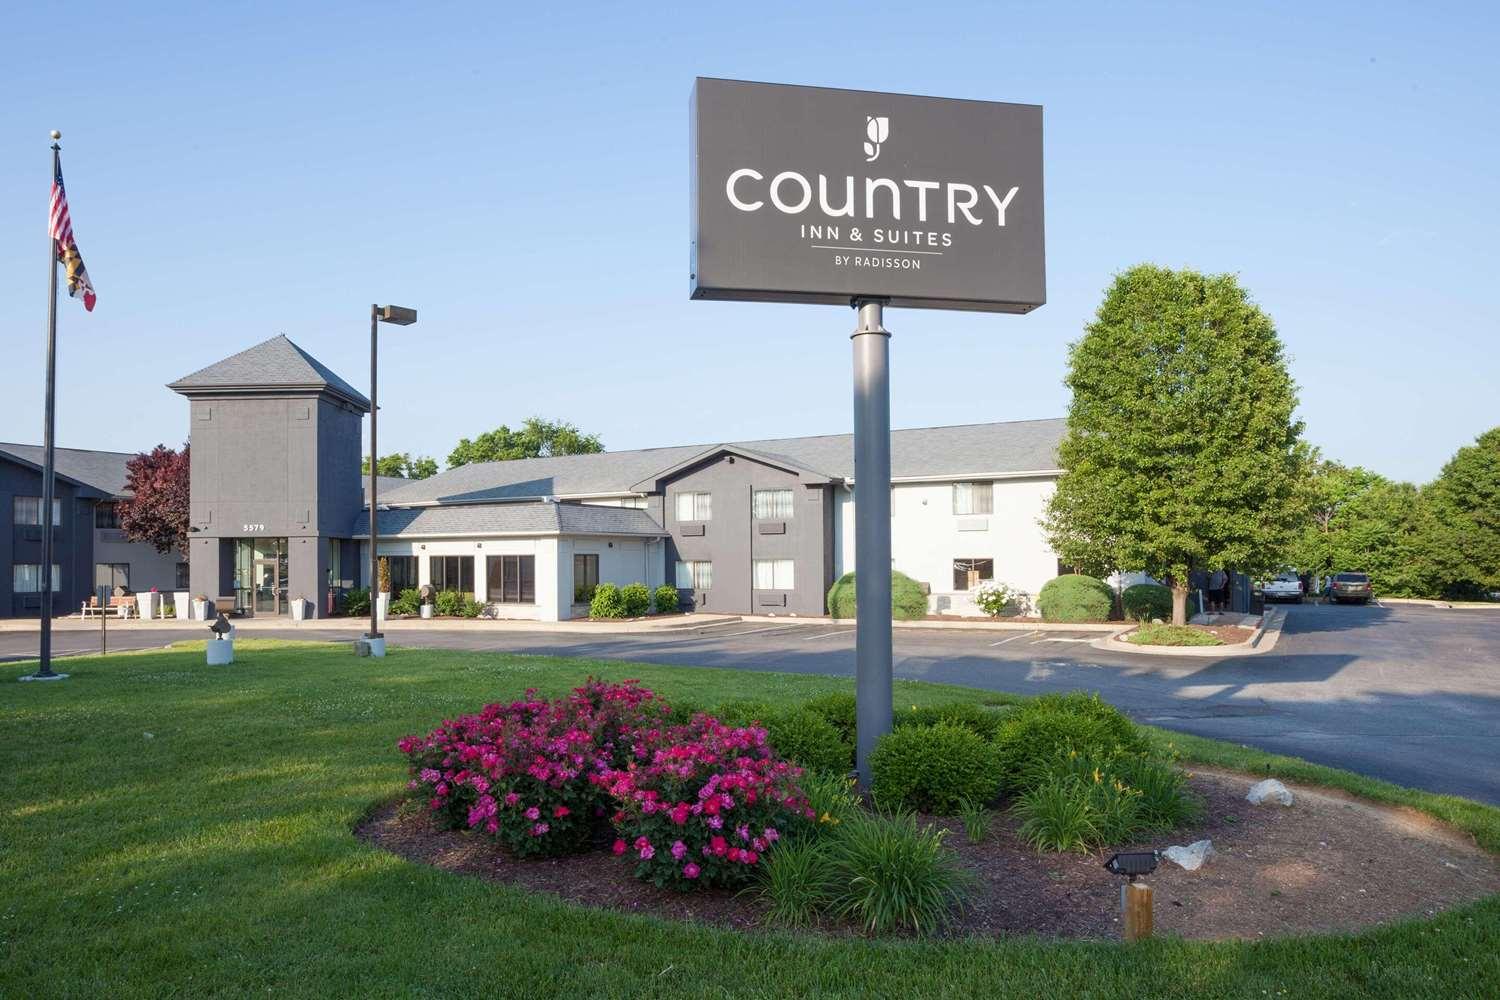 Country Inn & Suites By Radisson, Frederick, MD in Frederick, MD